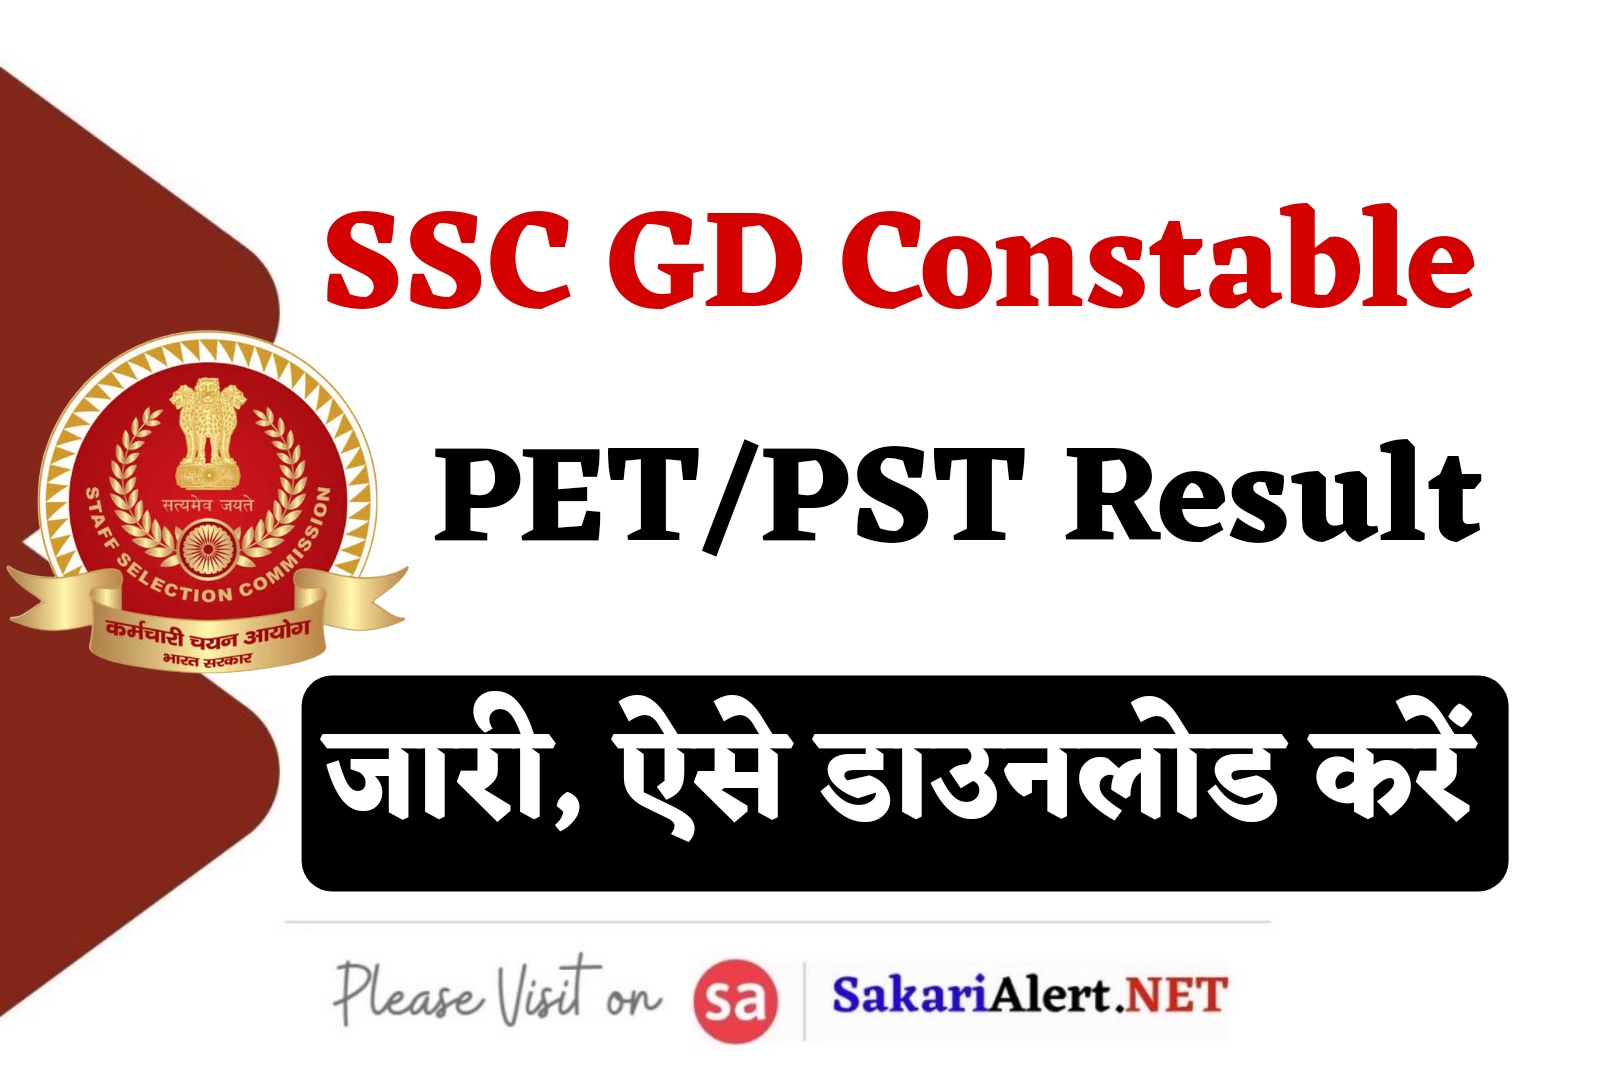 SSC GD Constable 2022 PET/PST Result